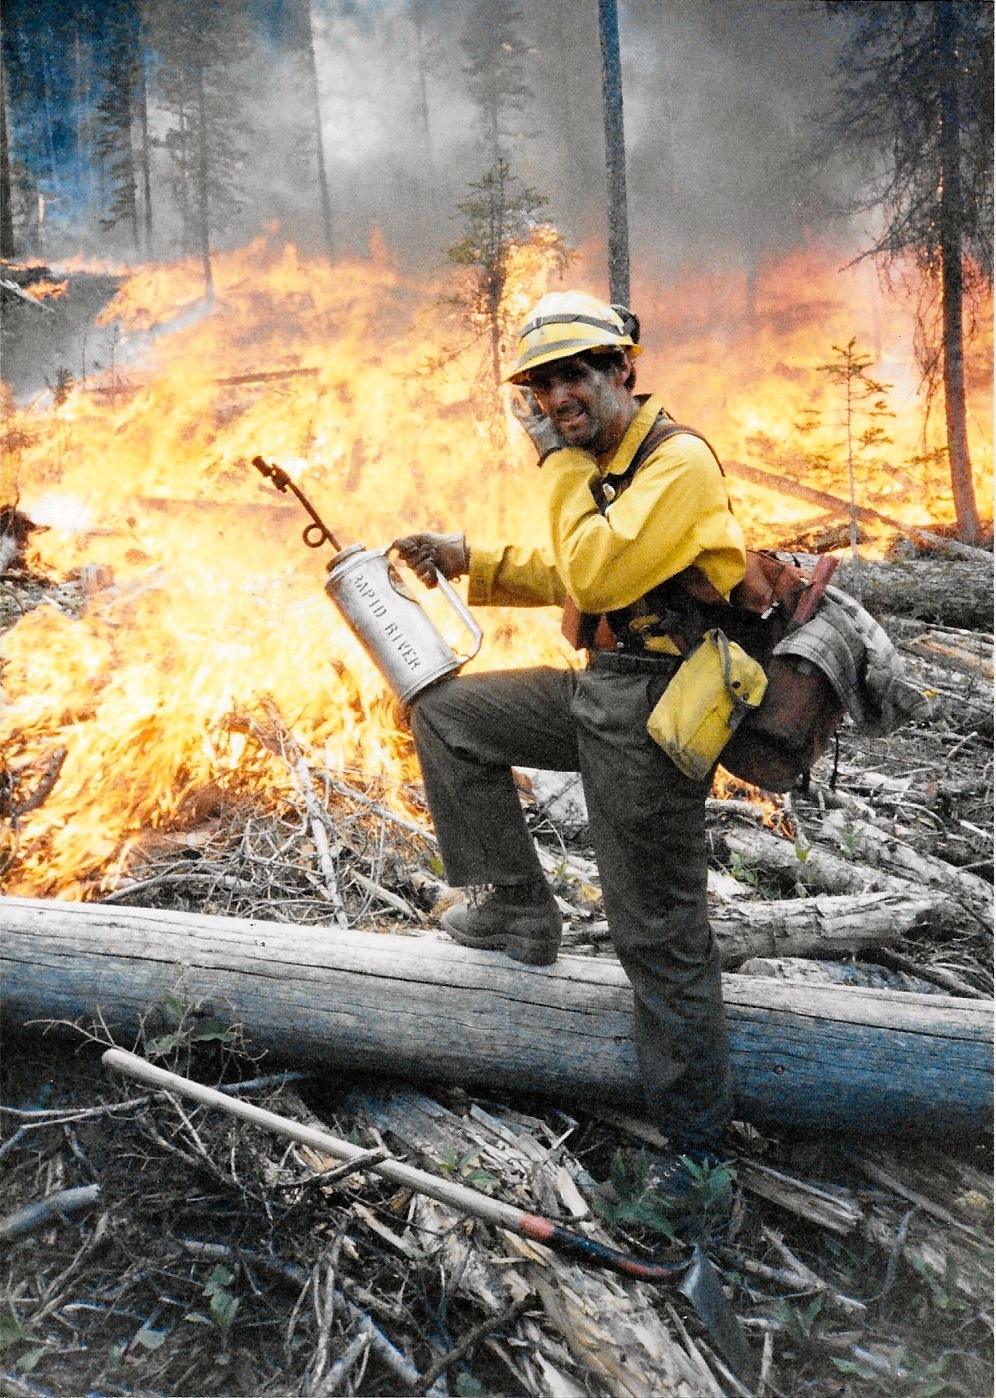 Rene Eustace at a burnout operation on the Clover-Mist fire outside Yellowstone National Park on Aug. 28, 2988. PHOTO COURTESY OF RENE EUSTACE